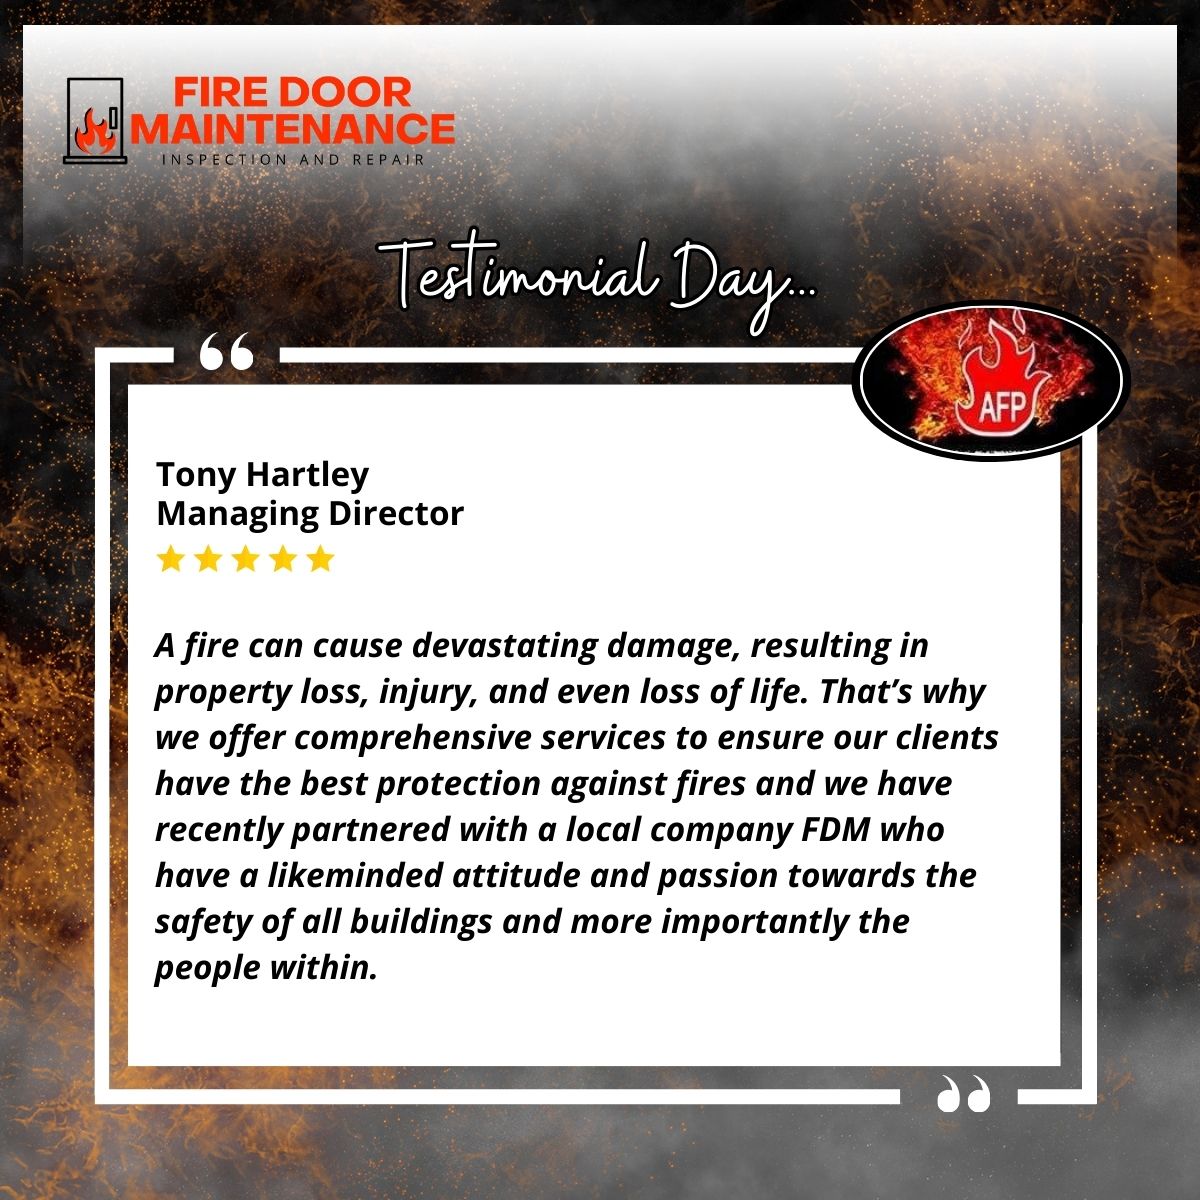 Testimonial Day!!!
We are delighted to celebrate our testimonial day with you!
.
#FDM #firedoormaintenance #firedoorinspection #firedoortraining #fdmbury #firedoorcourse #testimonial